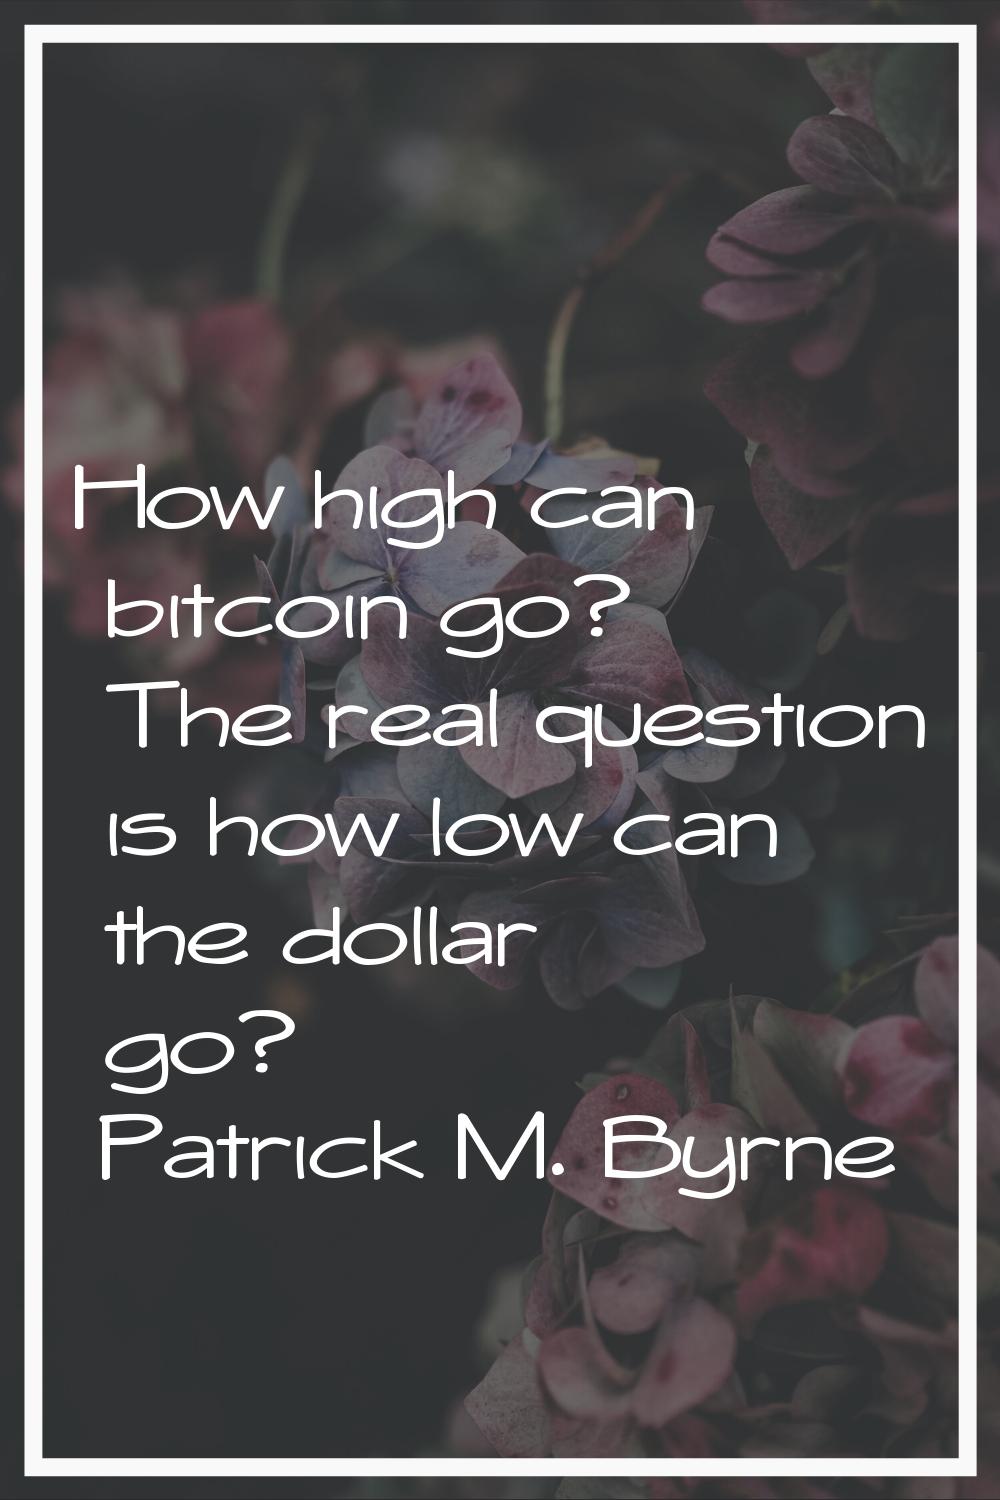 How high can bitcoin go? The real question is how low can the dollar go?